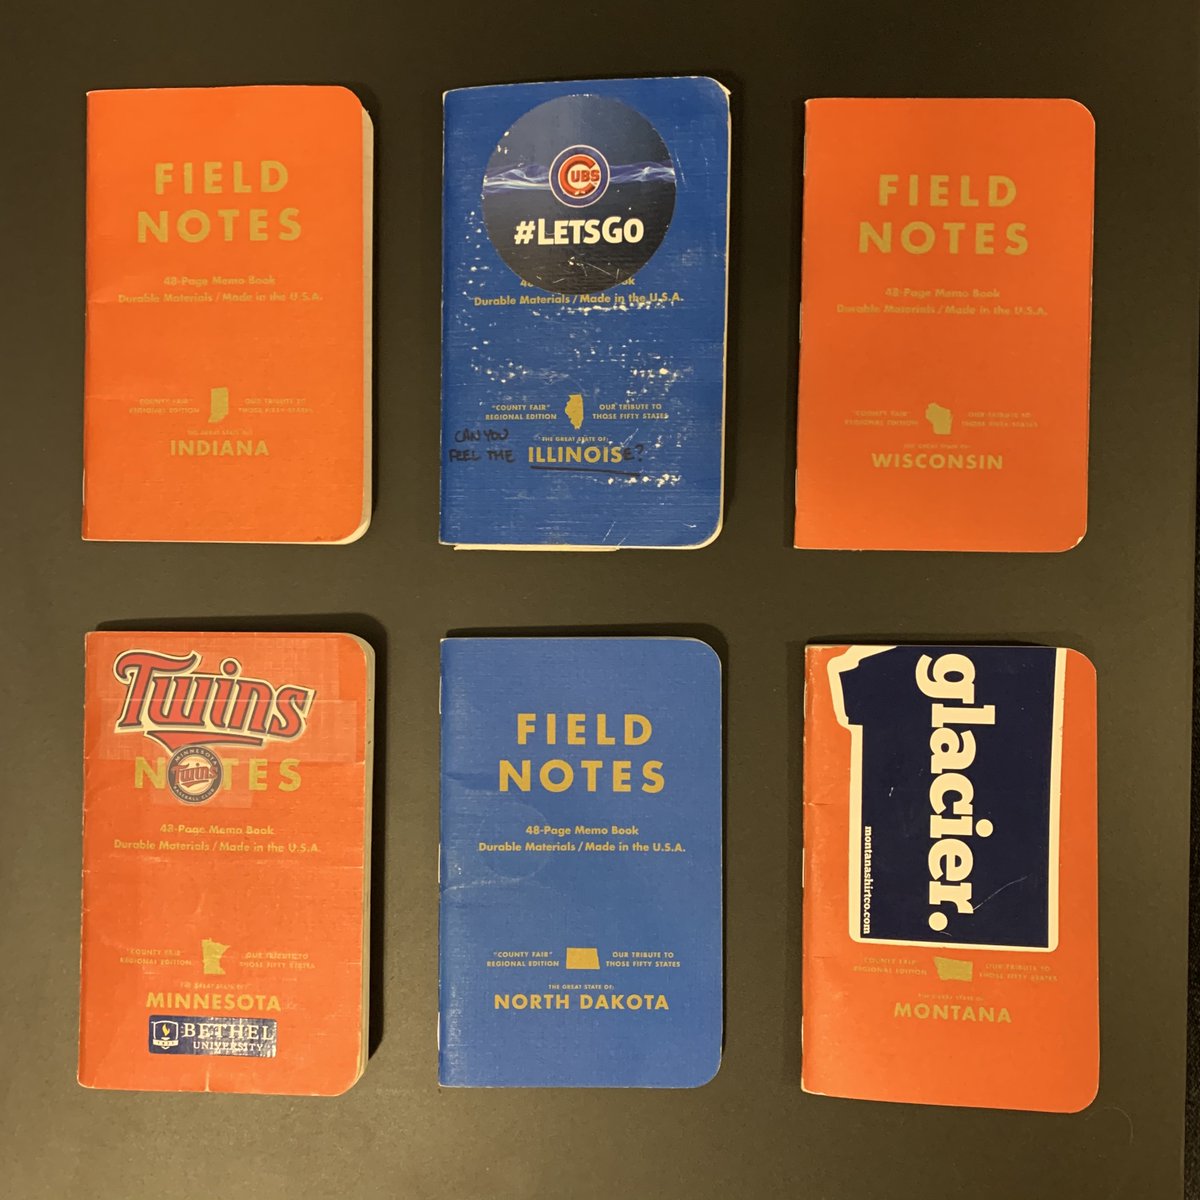 Day 2 of the trip saw OH, IN, IL, WI, and MN. Of course, IL is the  @FieldNotesBrand HQ - I stopped in to see the fine folks there, and came away with good wishes and a dated Chicago FN edition! A couple days in MN w/ family and a  @Twins game before heading to ND.